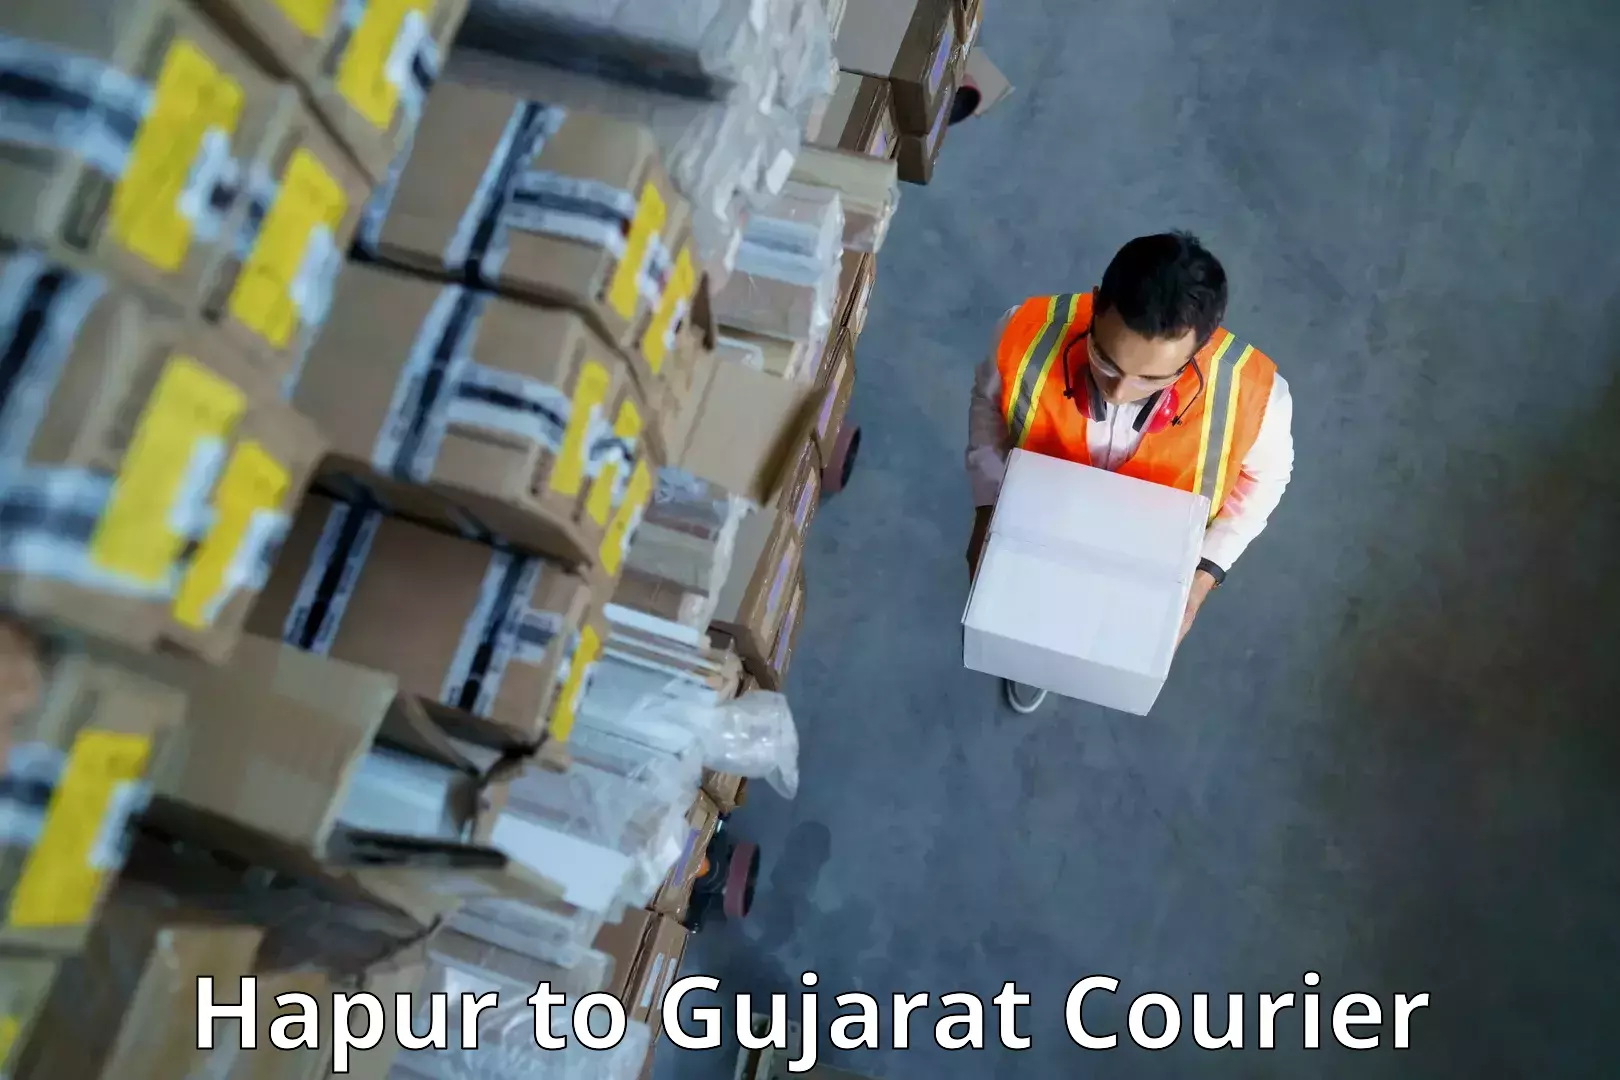 Cash on delivery service Hapur to Gujarat